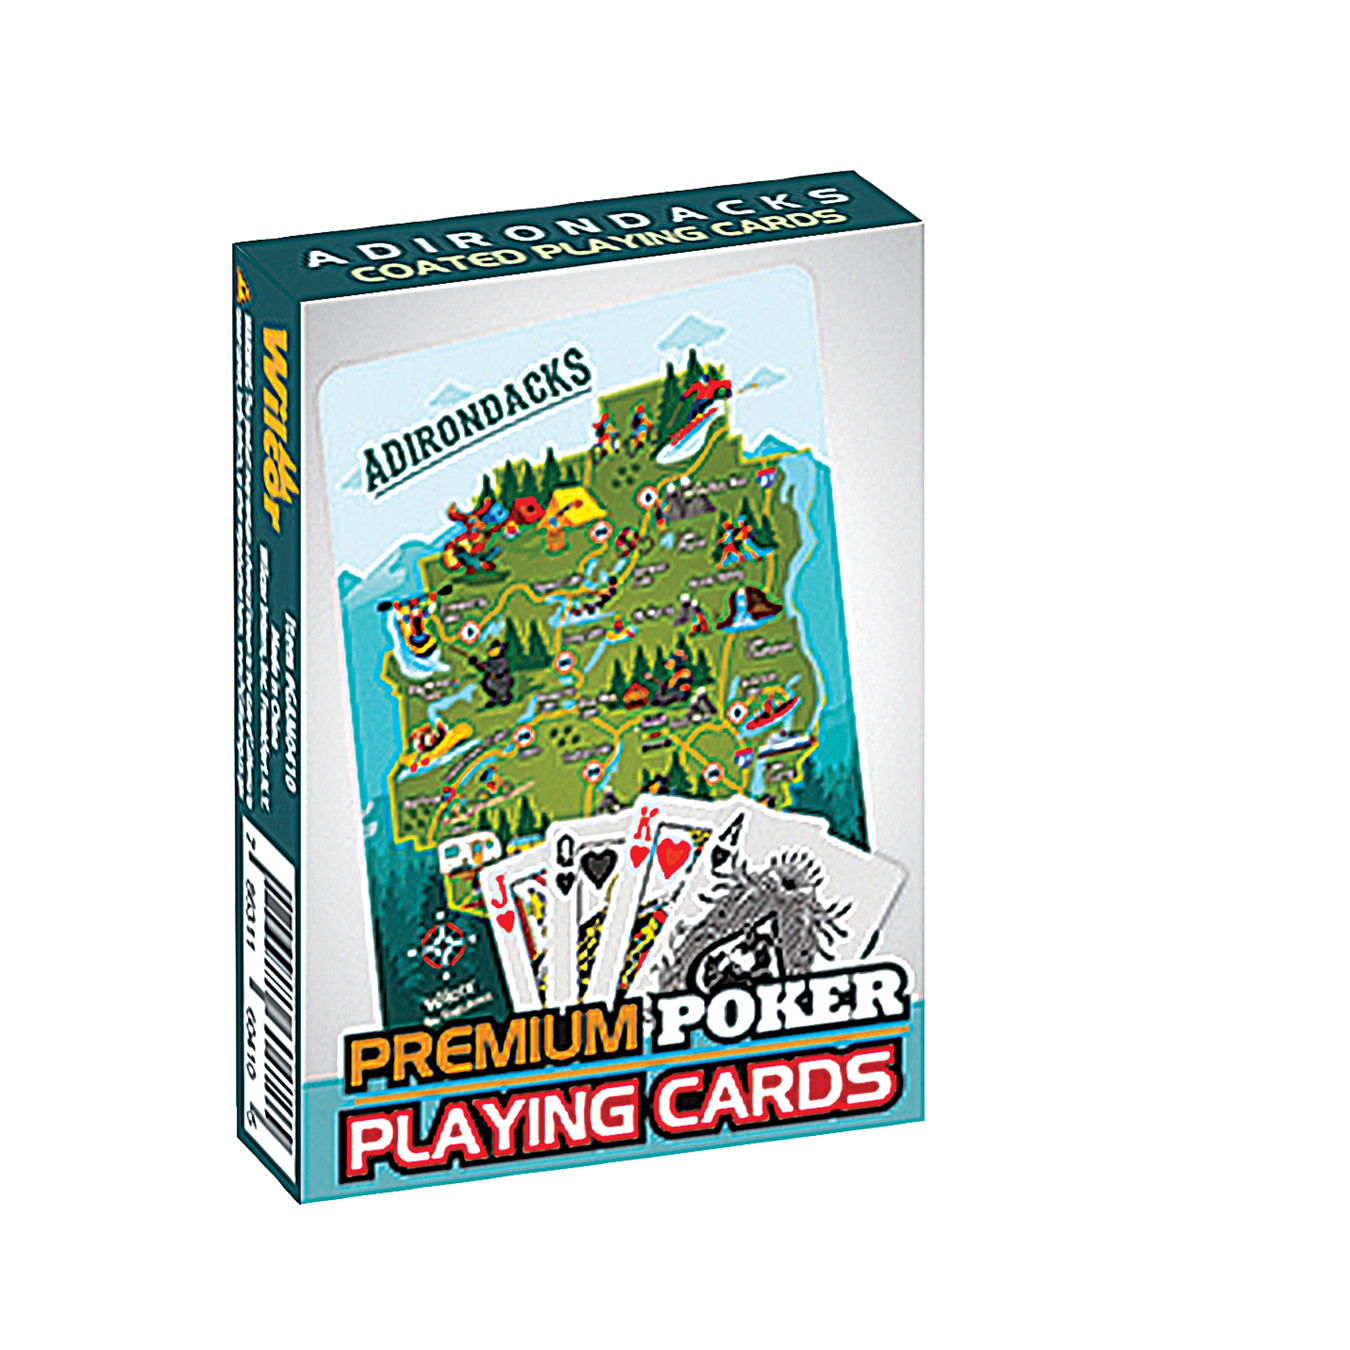 ADK MAP PLAYING CARDS